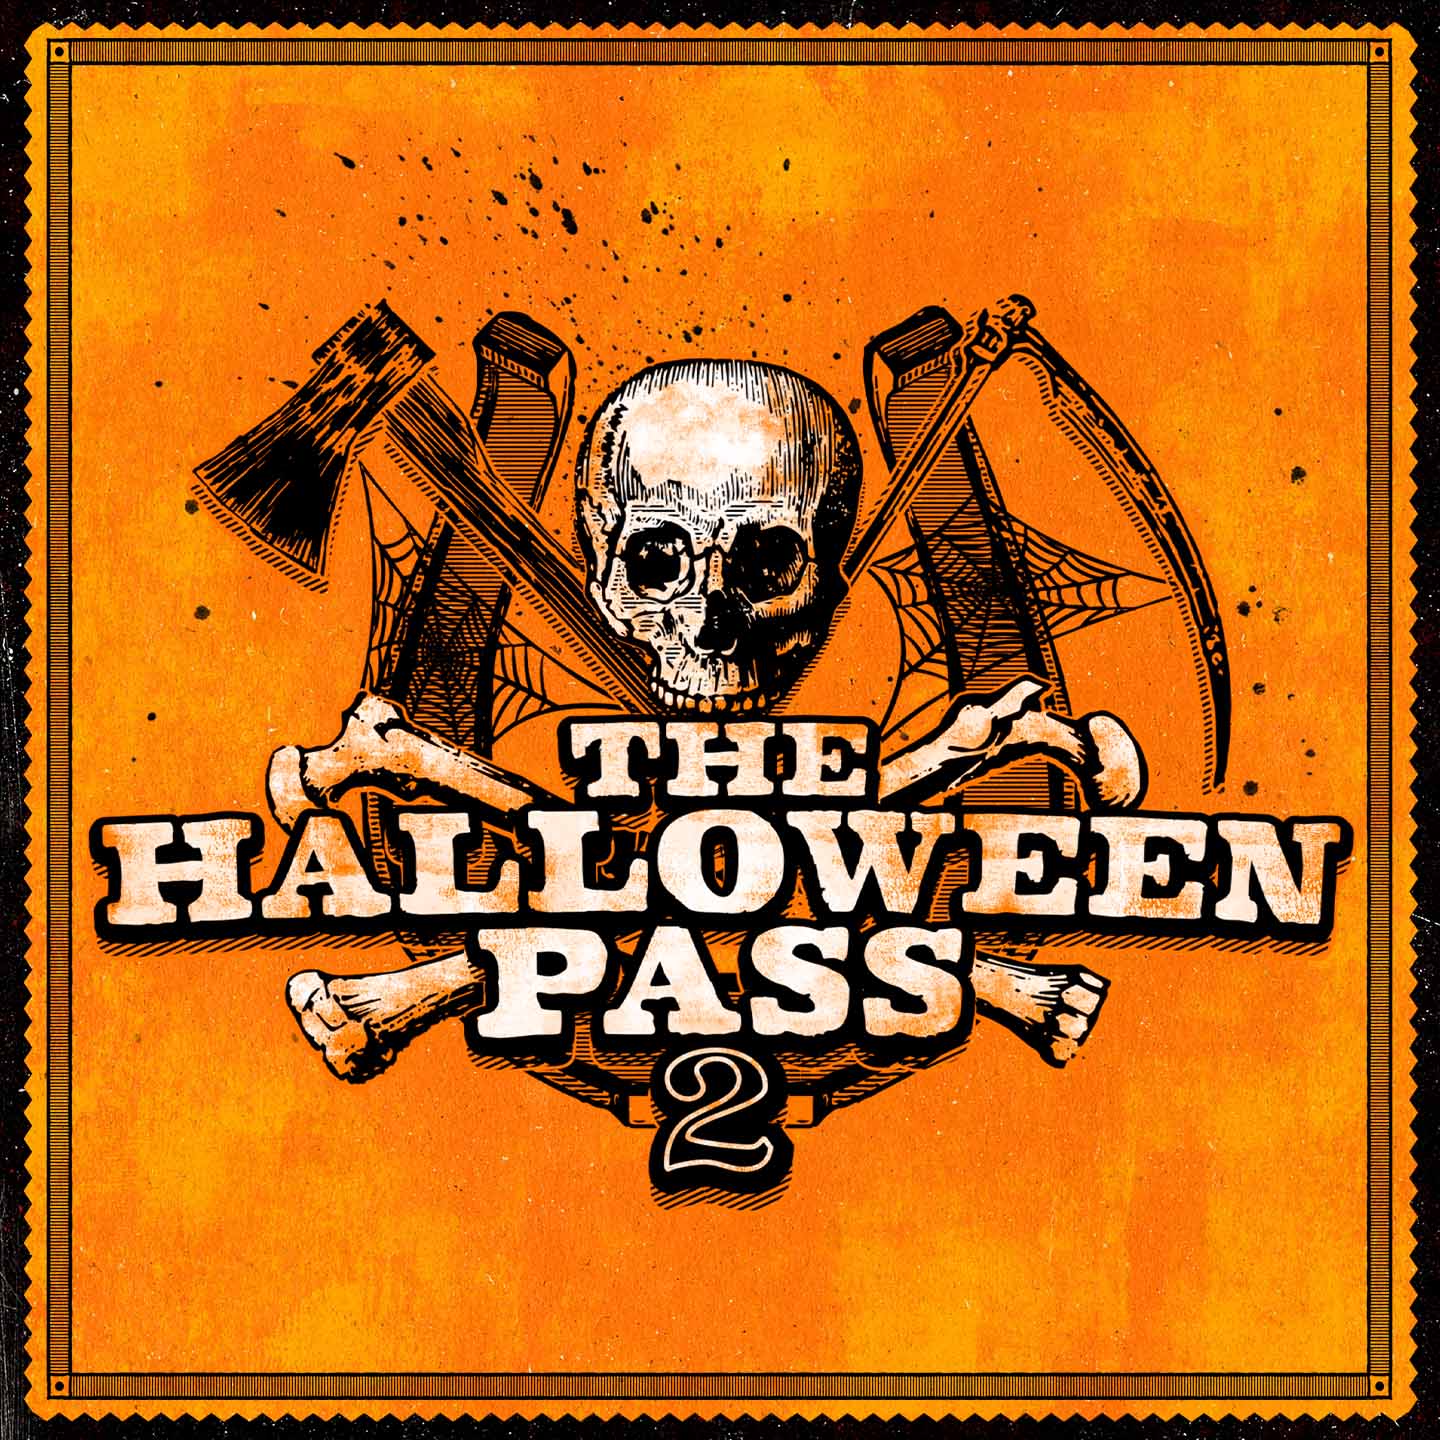 Red Dead Online Halloween Pass 2 Return, New Missions Coming October 18 &amp; more